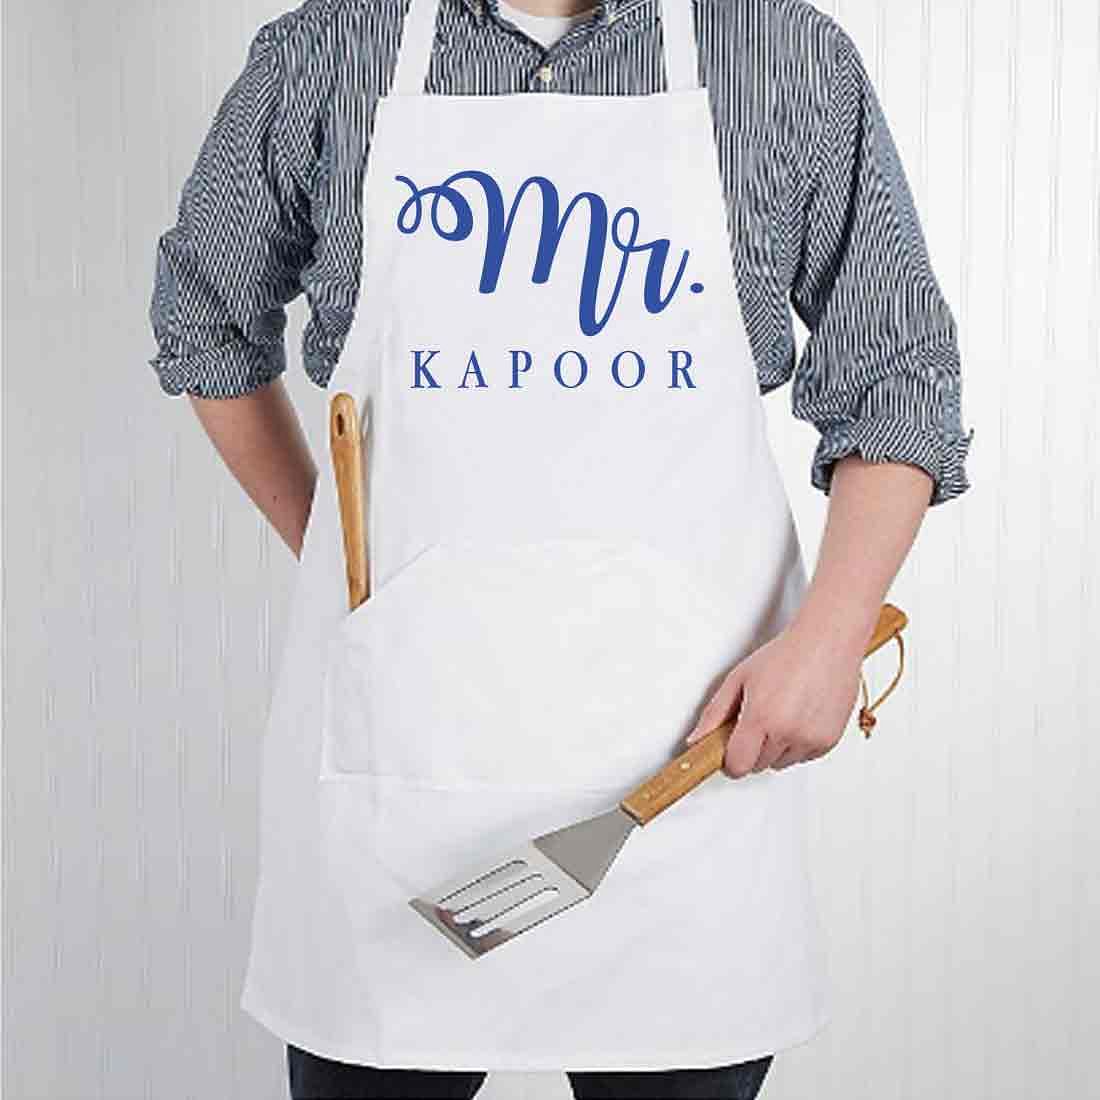 Personalized Aprons for Men Birthday Anniversary Gifts - Mr Nutcase